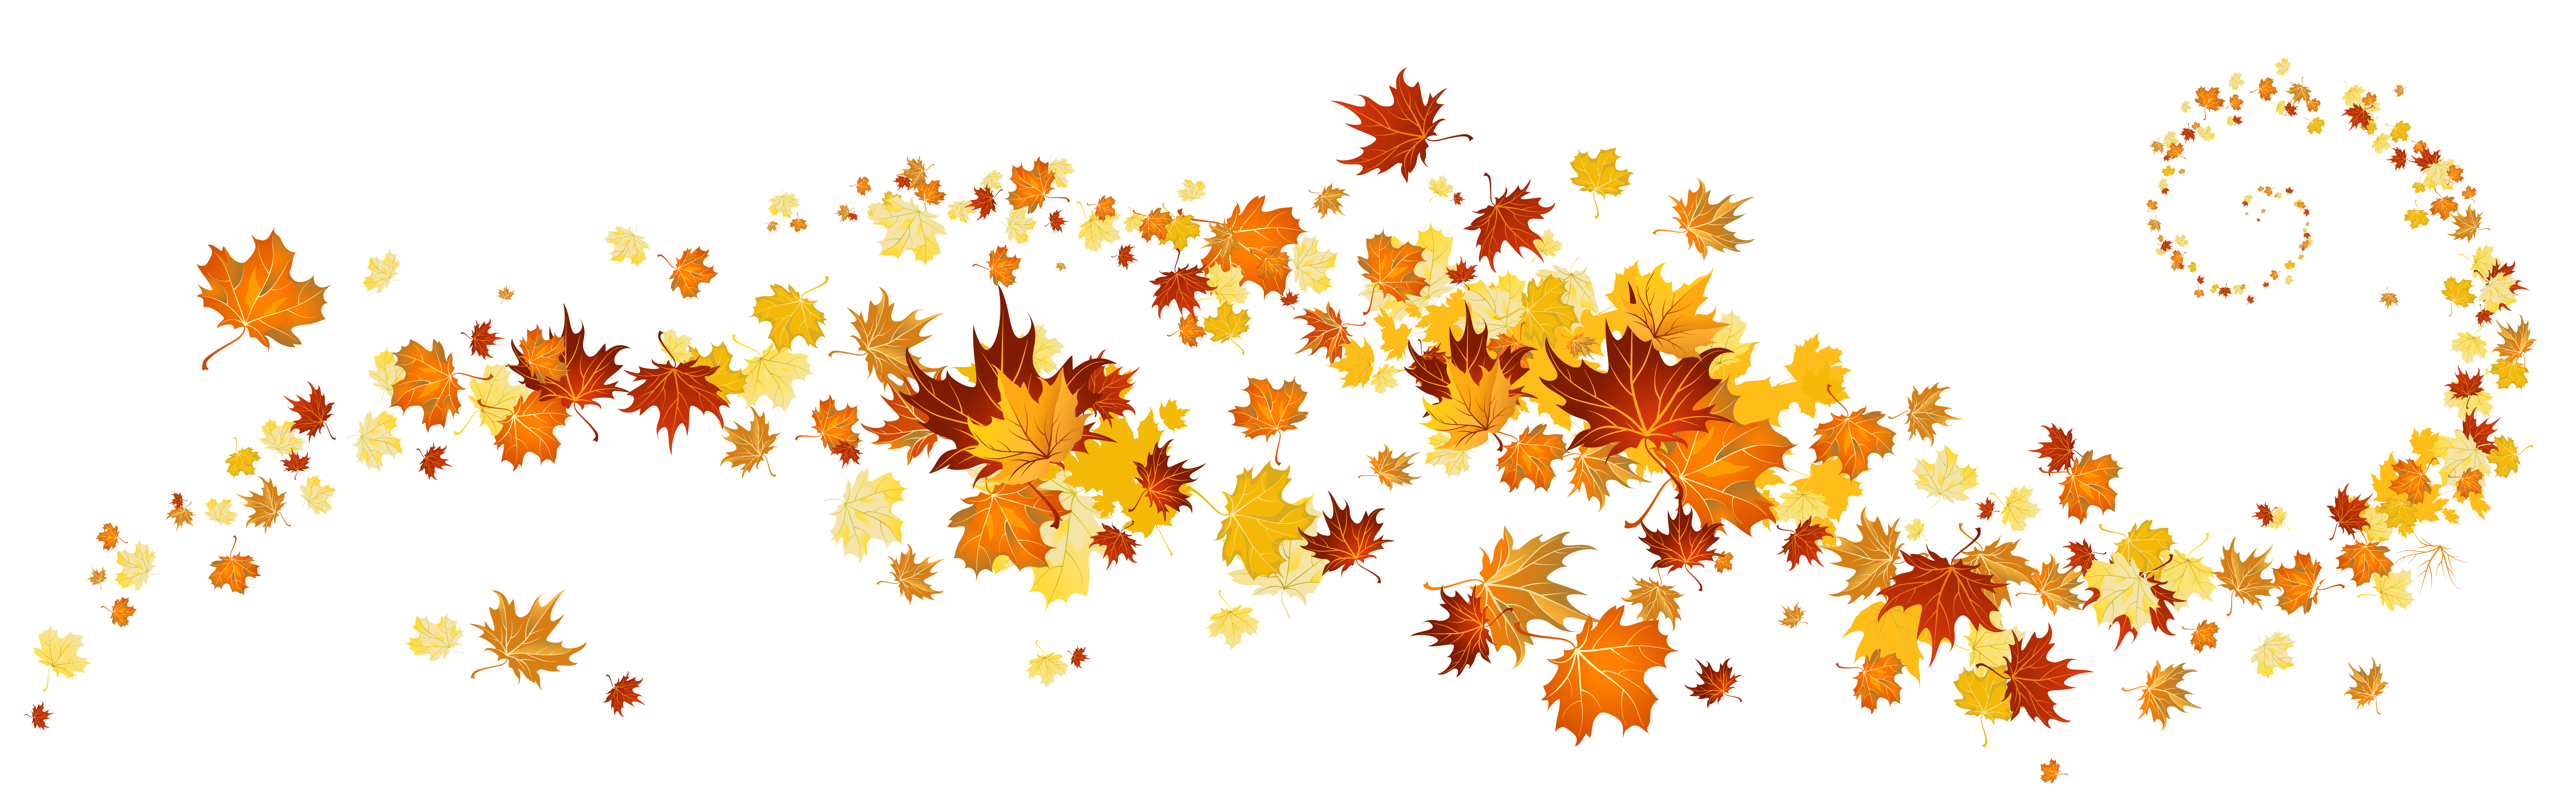 Garland clipart autumn.  collection of october